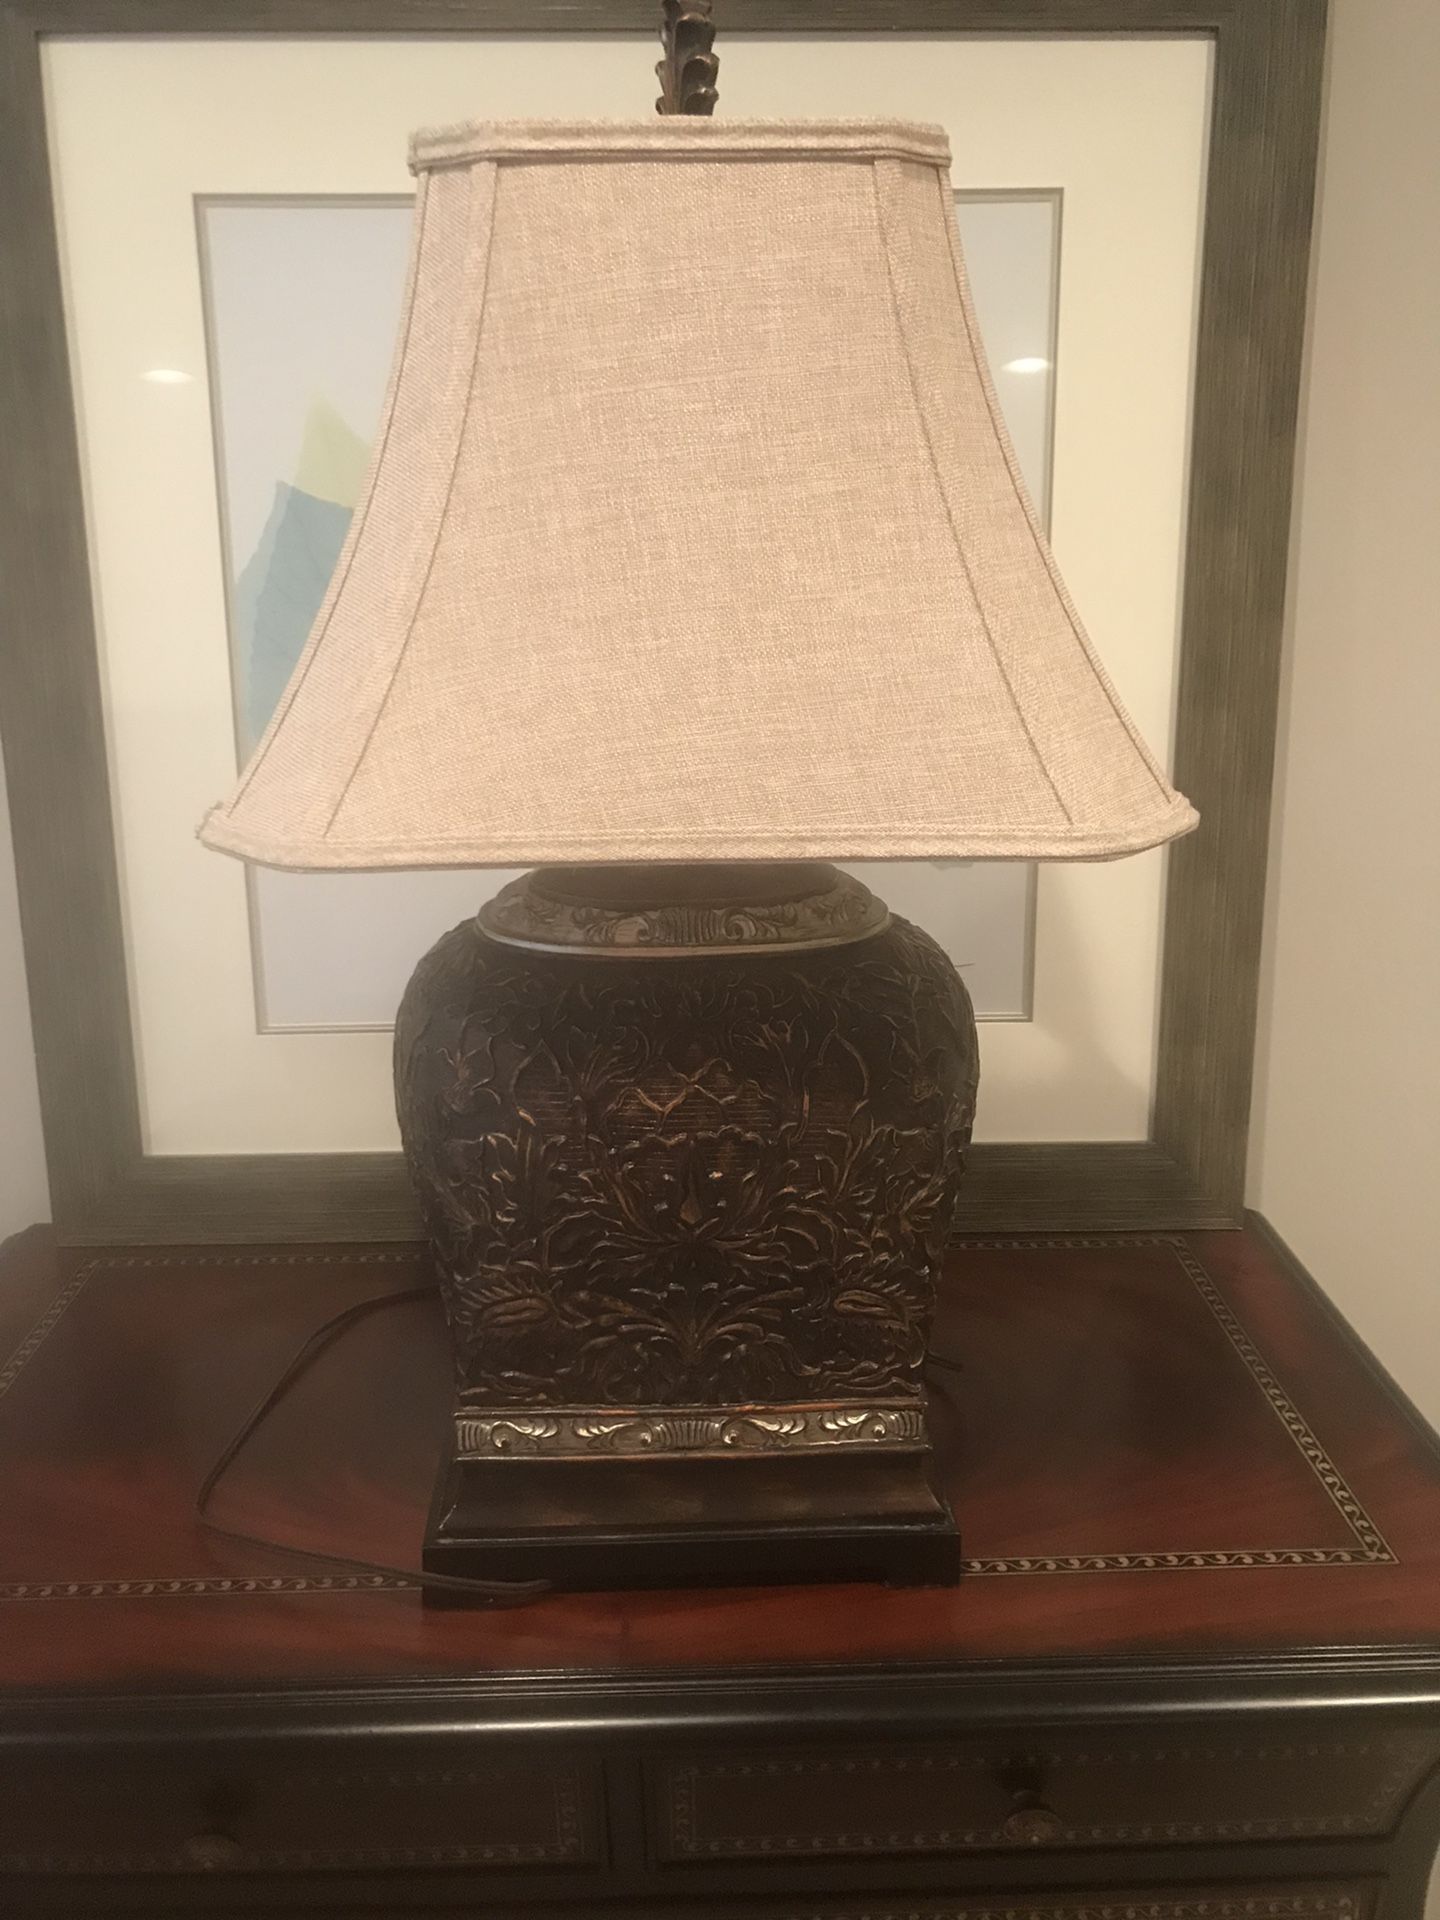 Set of Large Table Lamps from Homearama